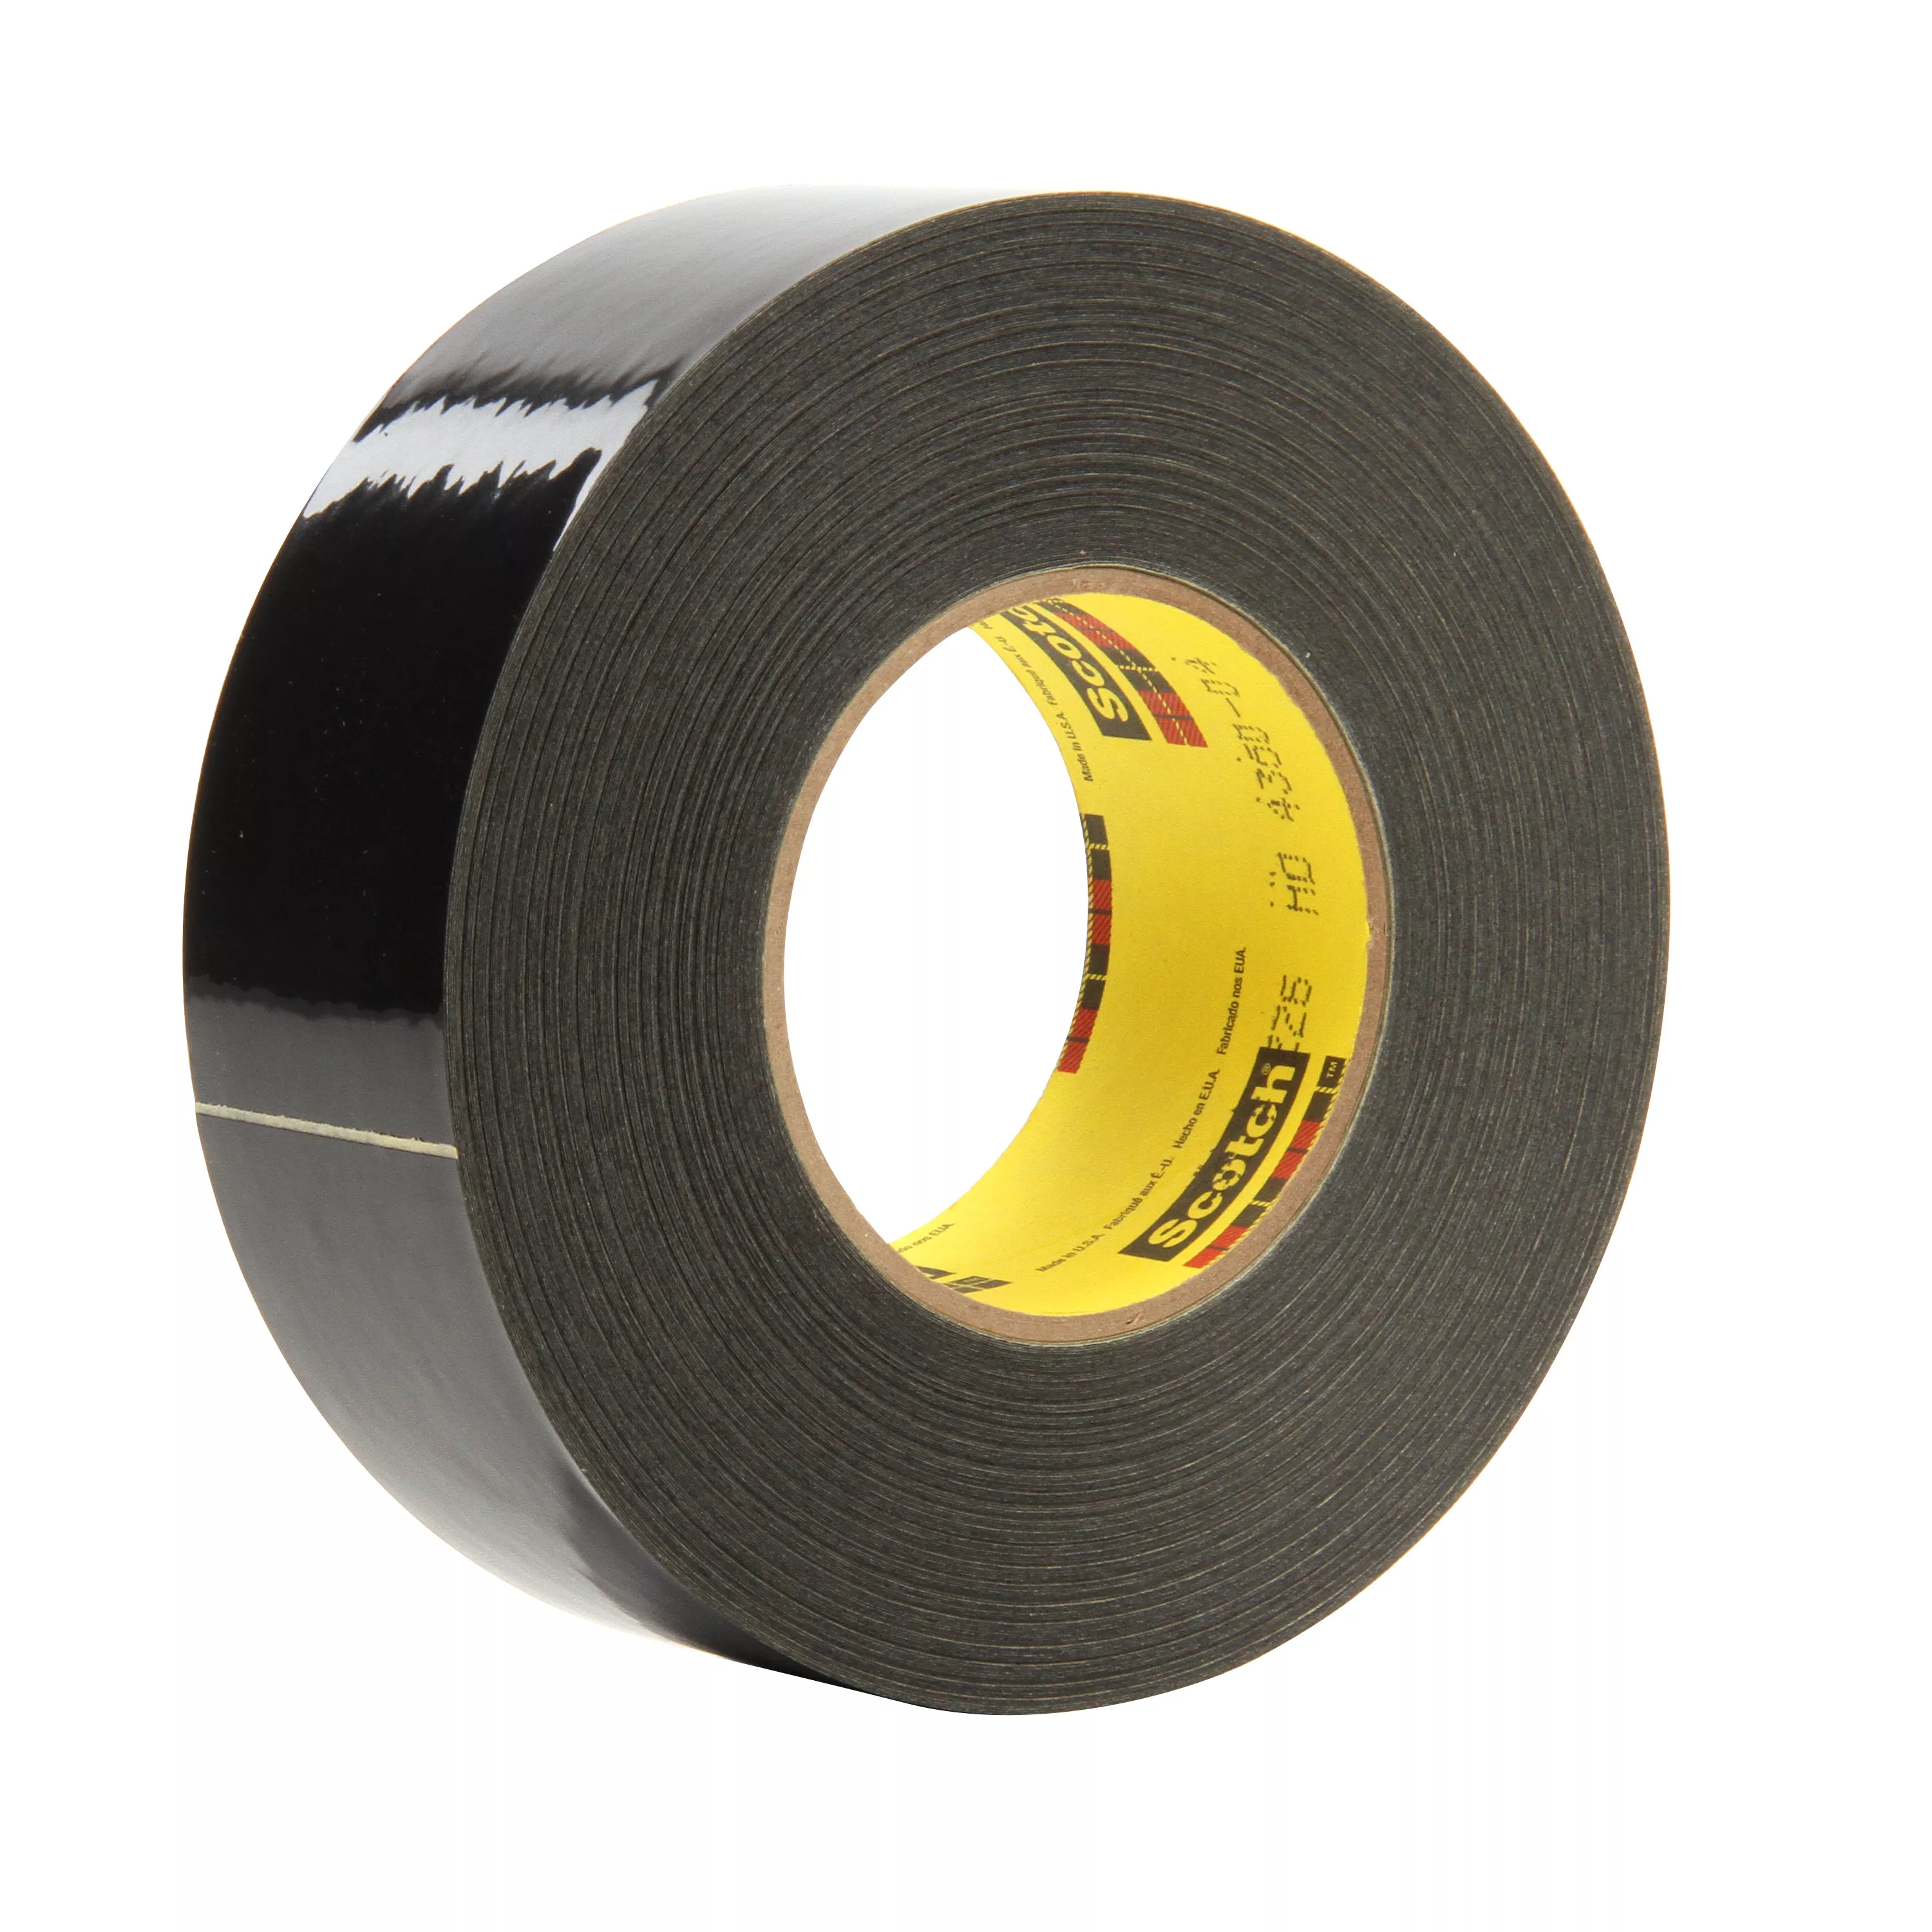 Scotch® Solvent Resistant Masking Tape 226, Black, 2 in x 60 yd, 10.6
mil, 24/Case